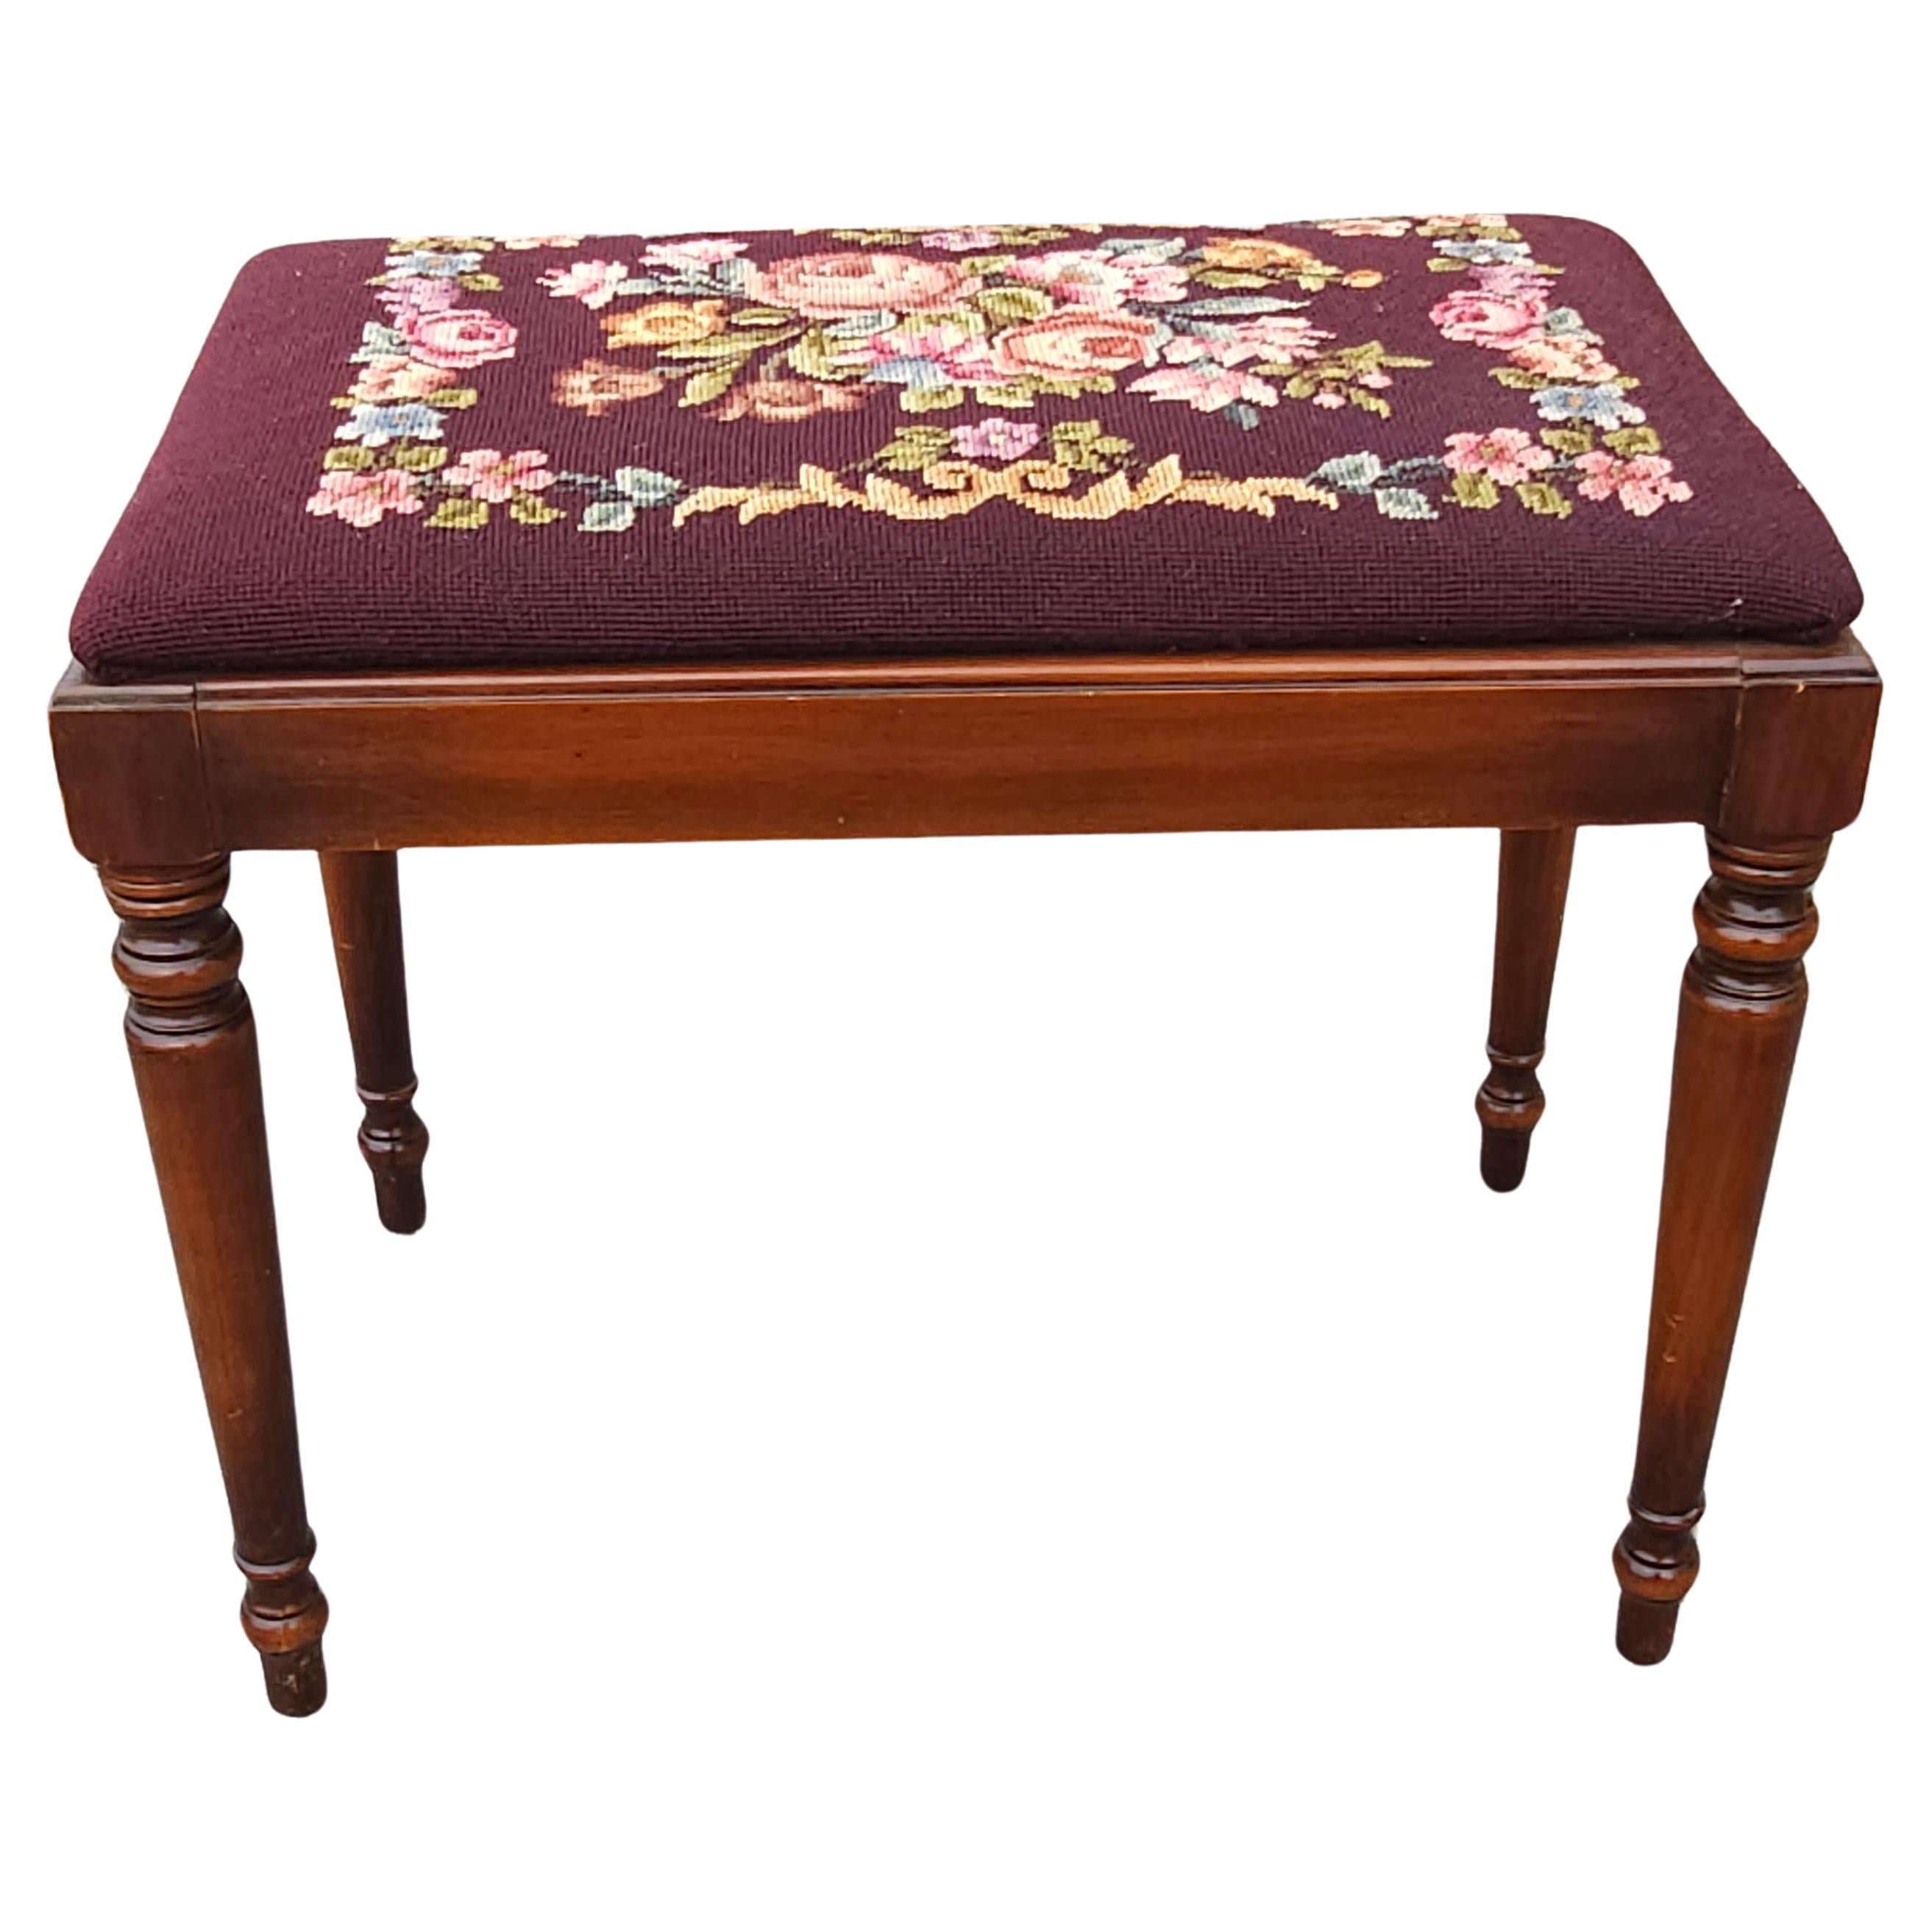 Mid 20th Century Kindel Furniture Oxford Cherry & Needlepoint Upholstered Bench For Sale